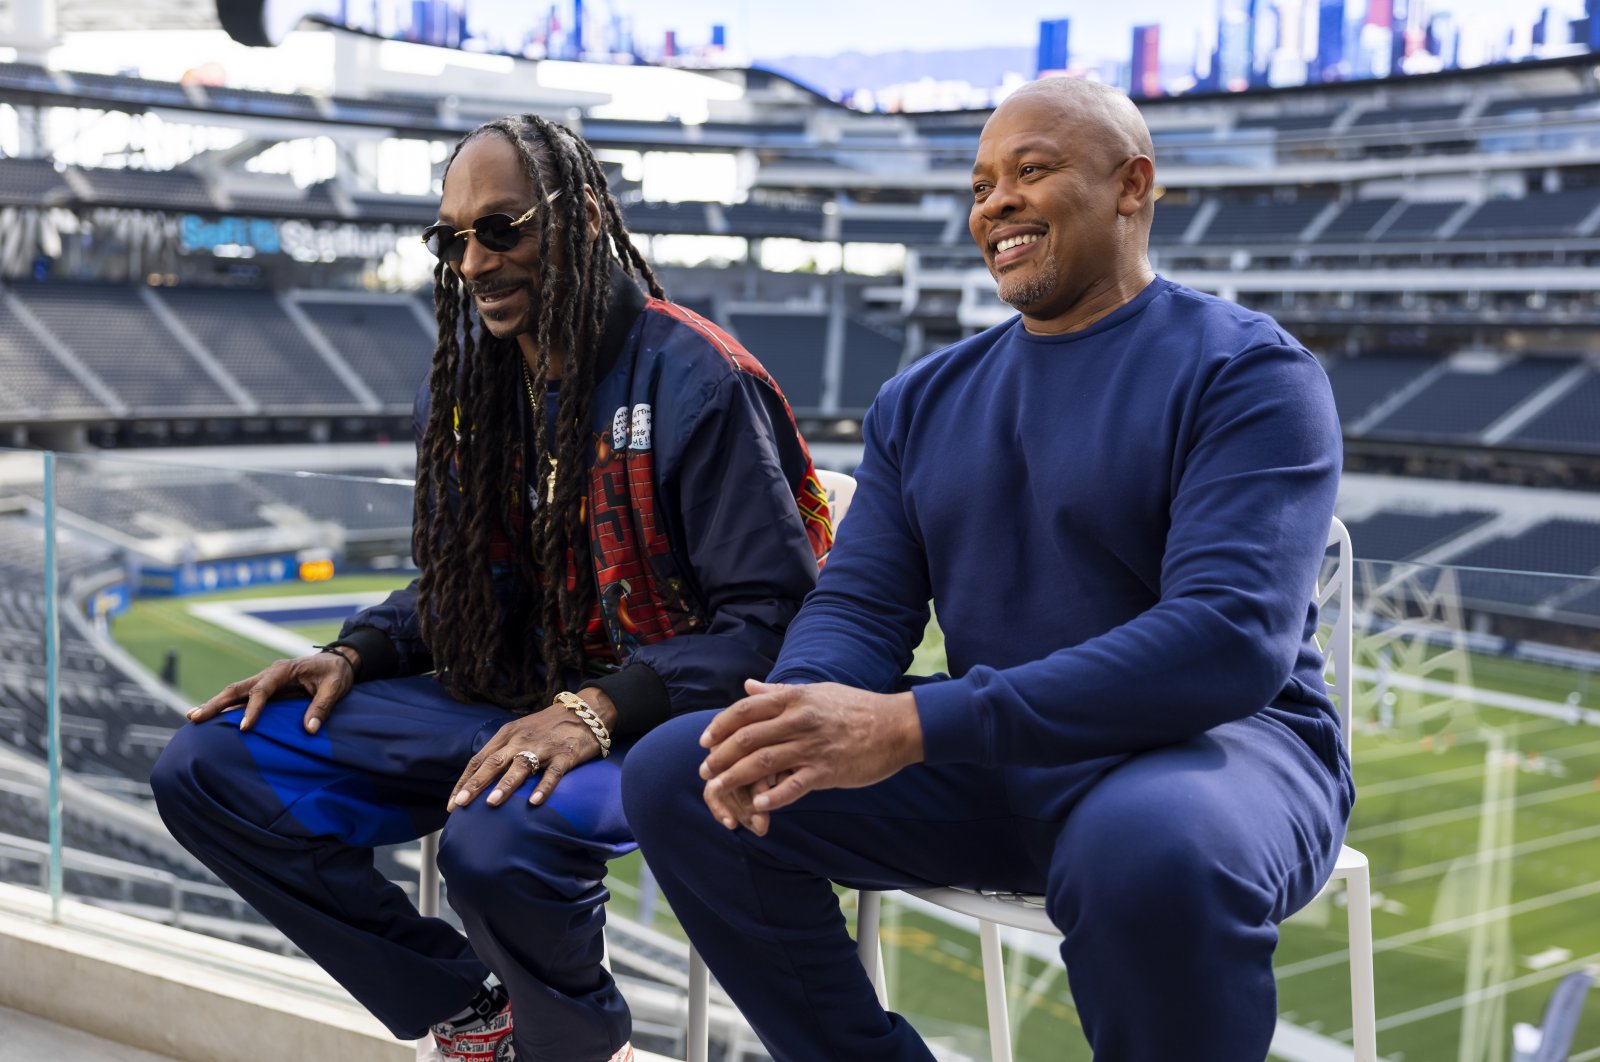 Snoop Dogg (L) and Dr. Dre are interviewed for the Pepsi Super Bowl LVI Halftime Show announcement at SoFi Stadium in Inglewood, California, U.S., Sept. 29, 2021. (NFL via AP, File)